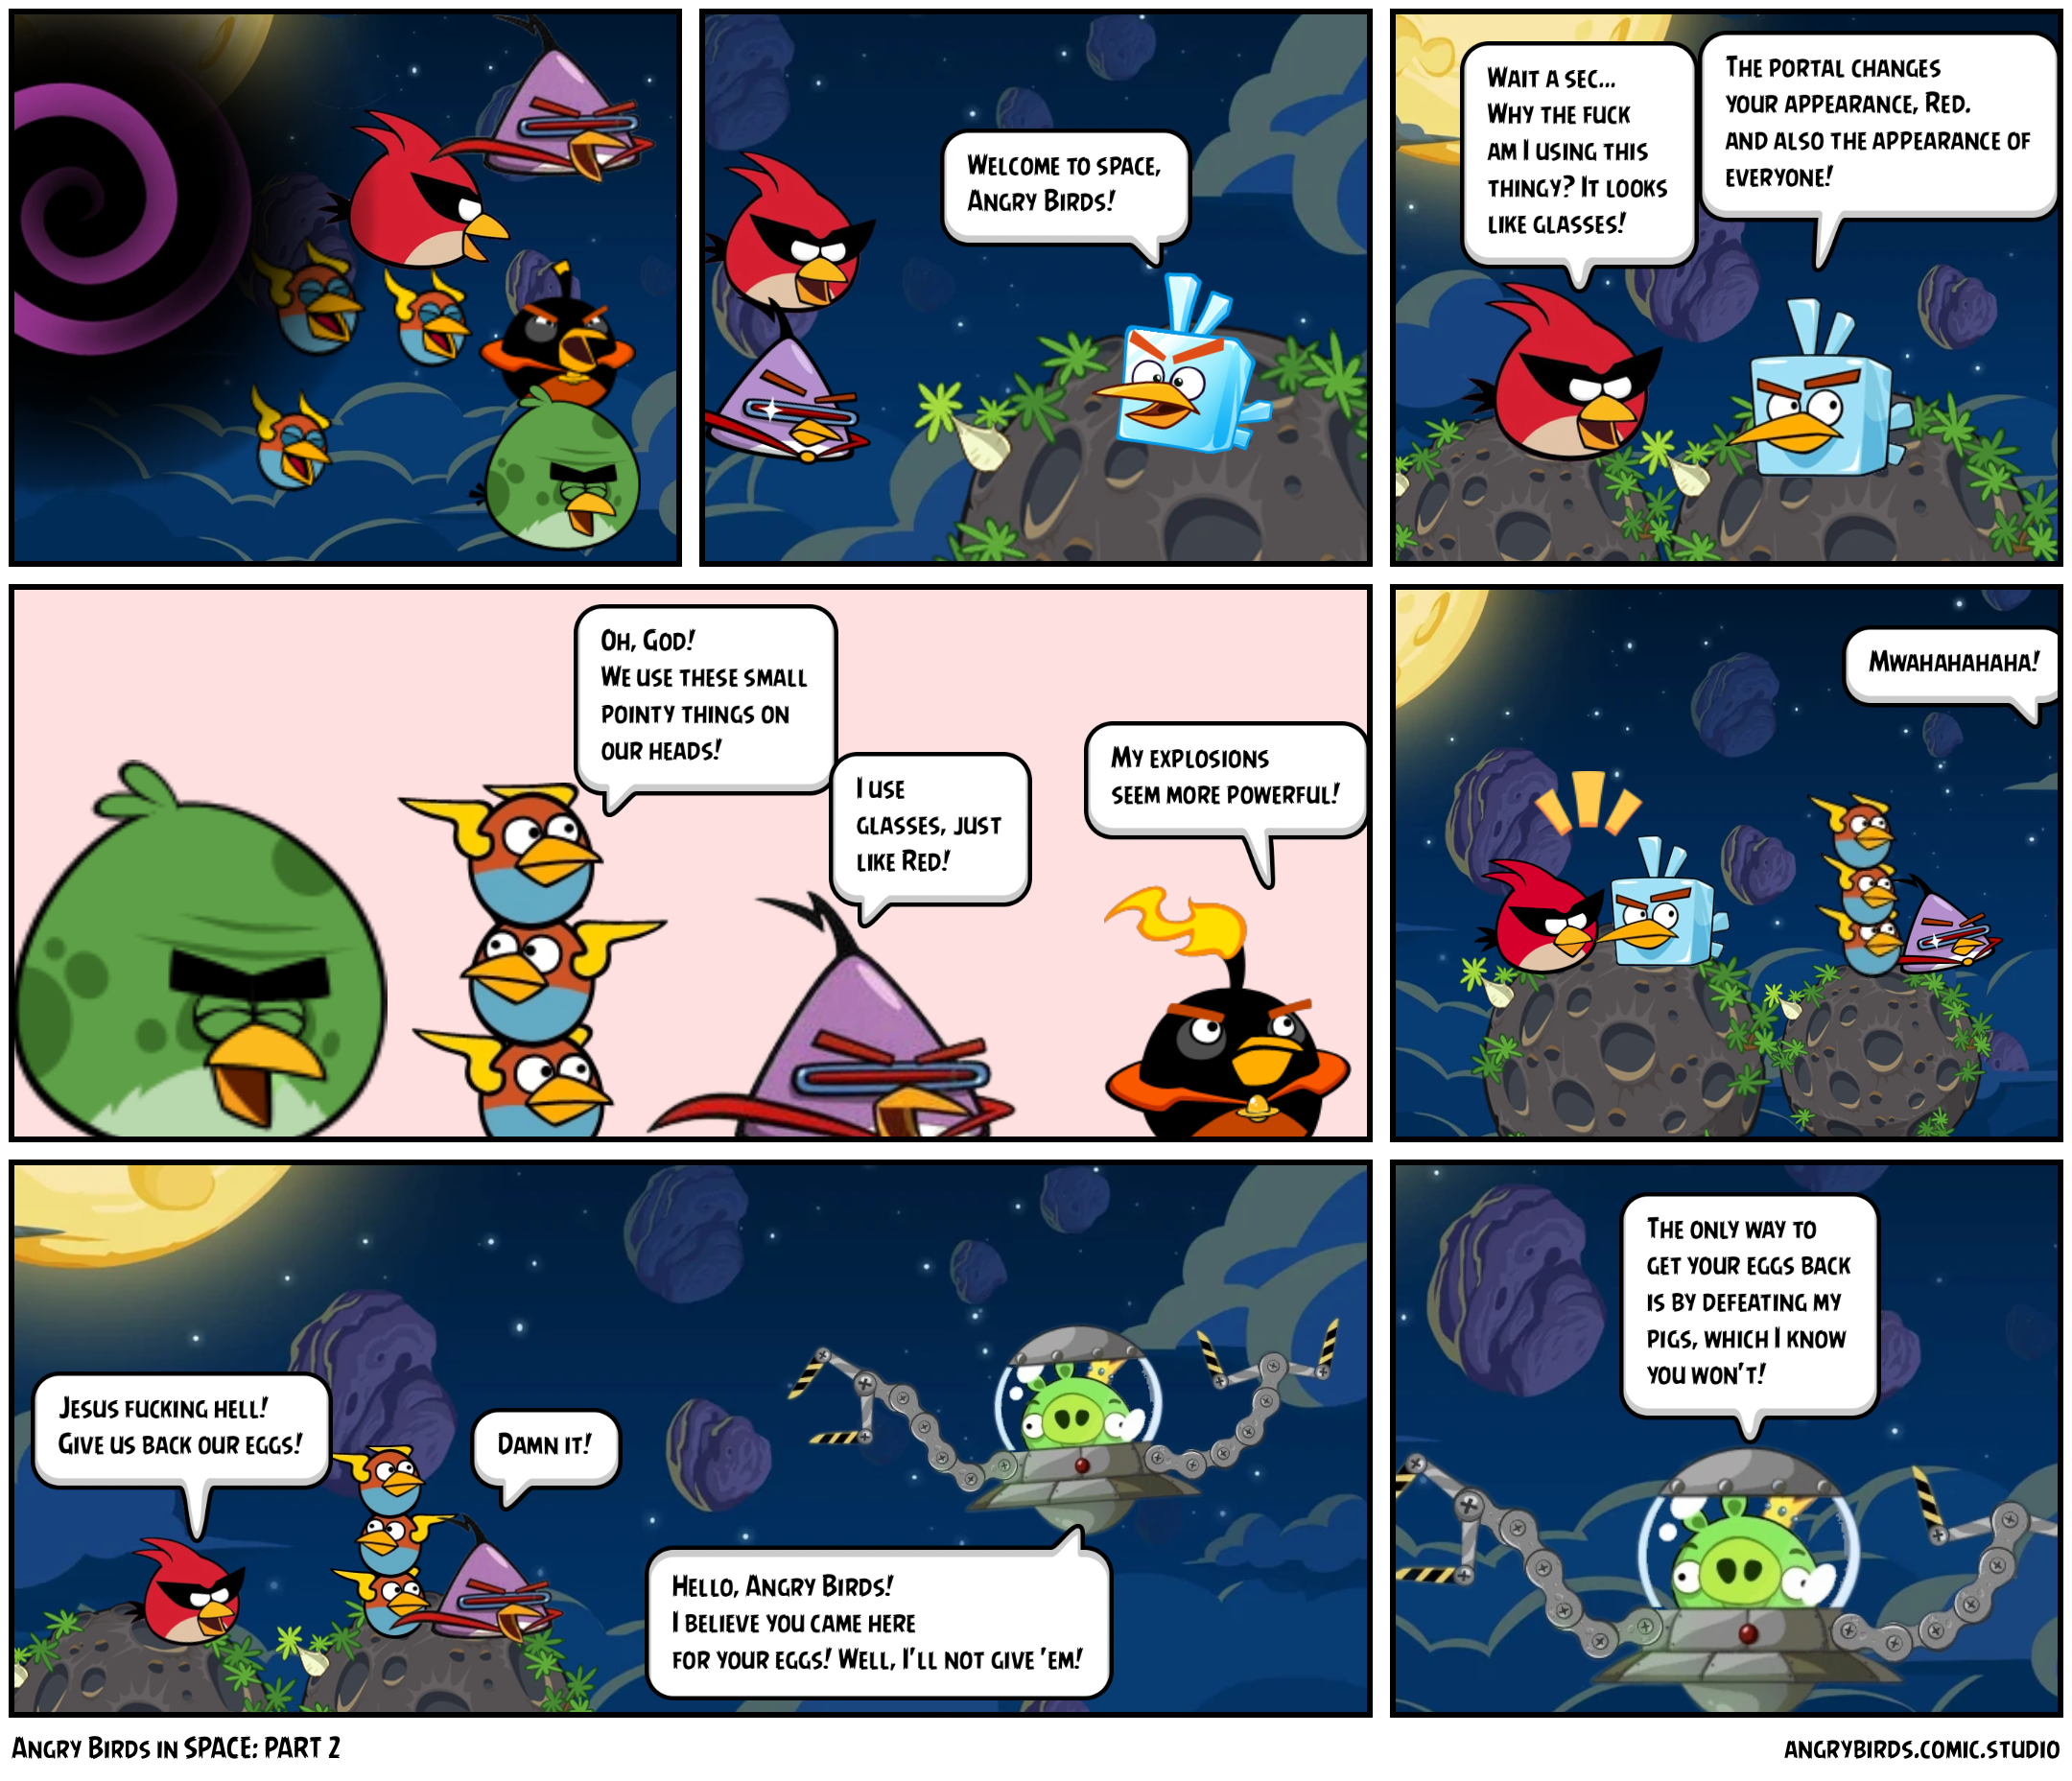 Angry Birds in SPACE: PART 2